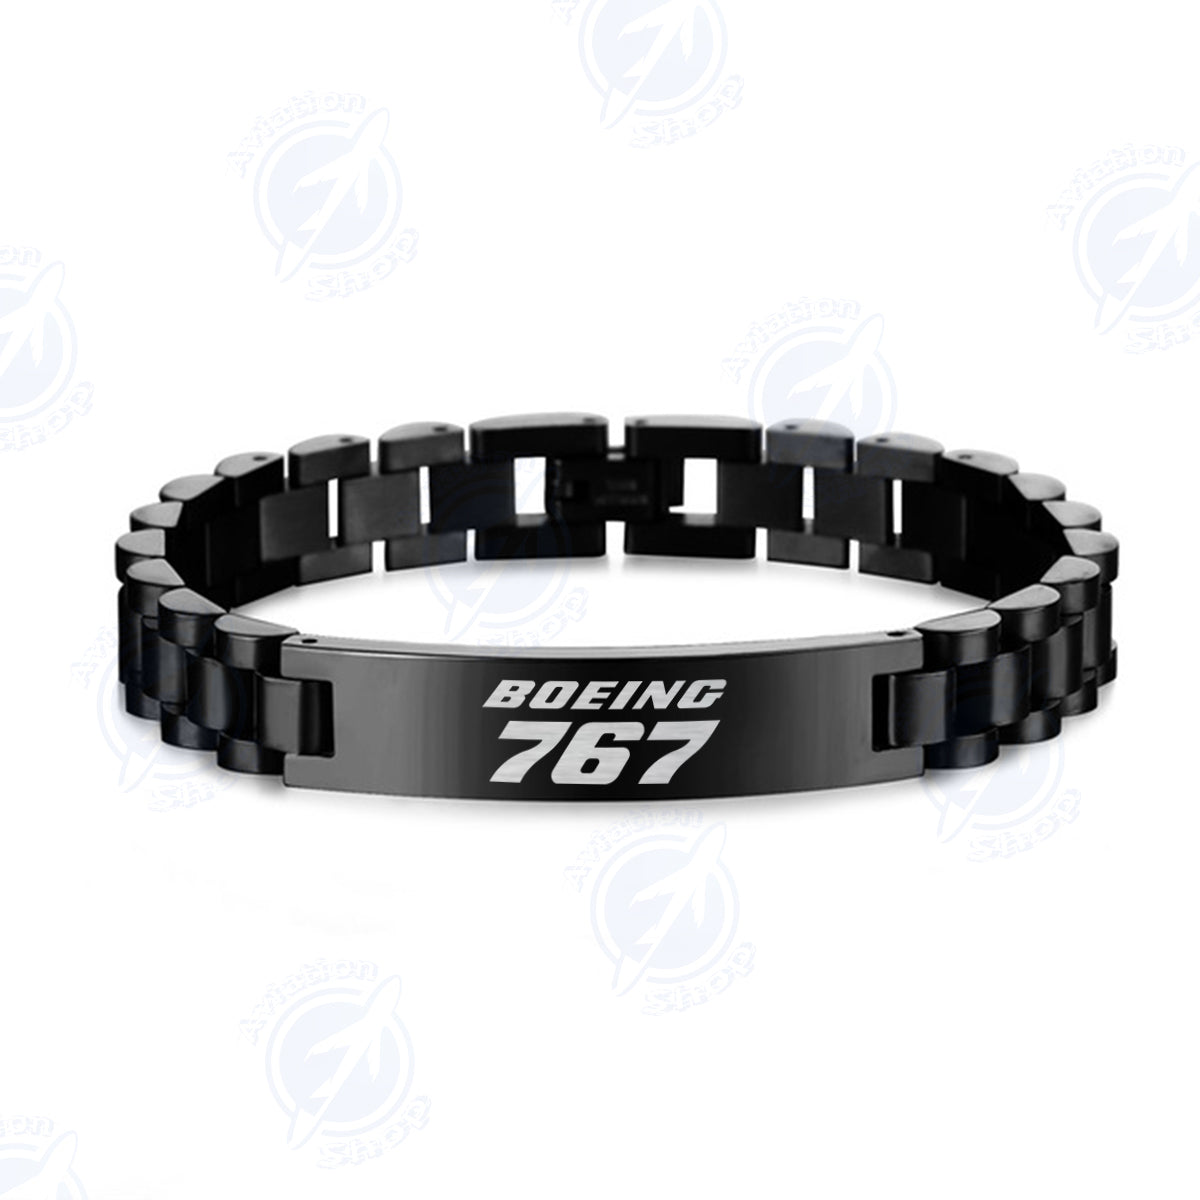 Boeing 767 & Text Designed Stainless Steel Chain Bracelets